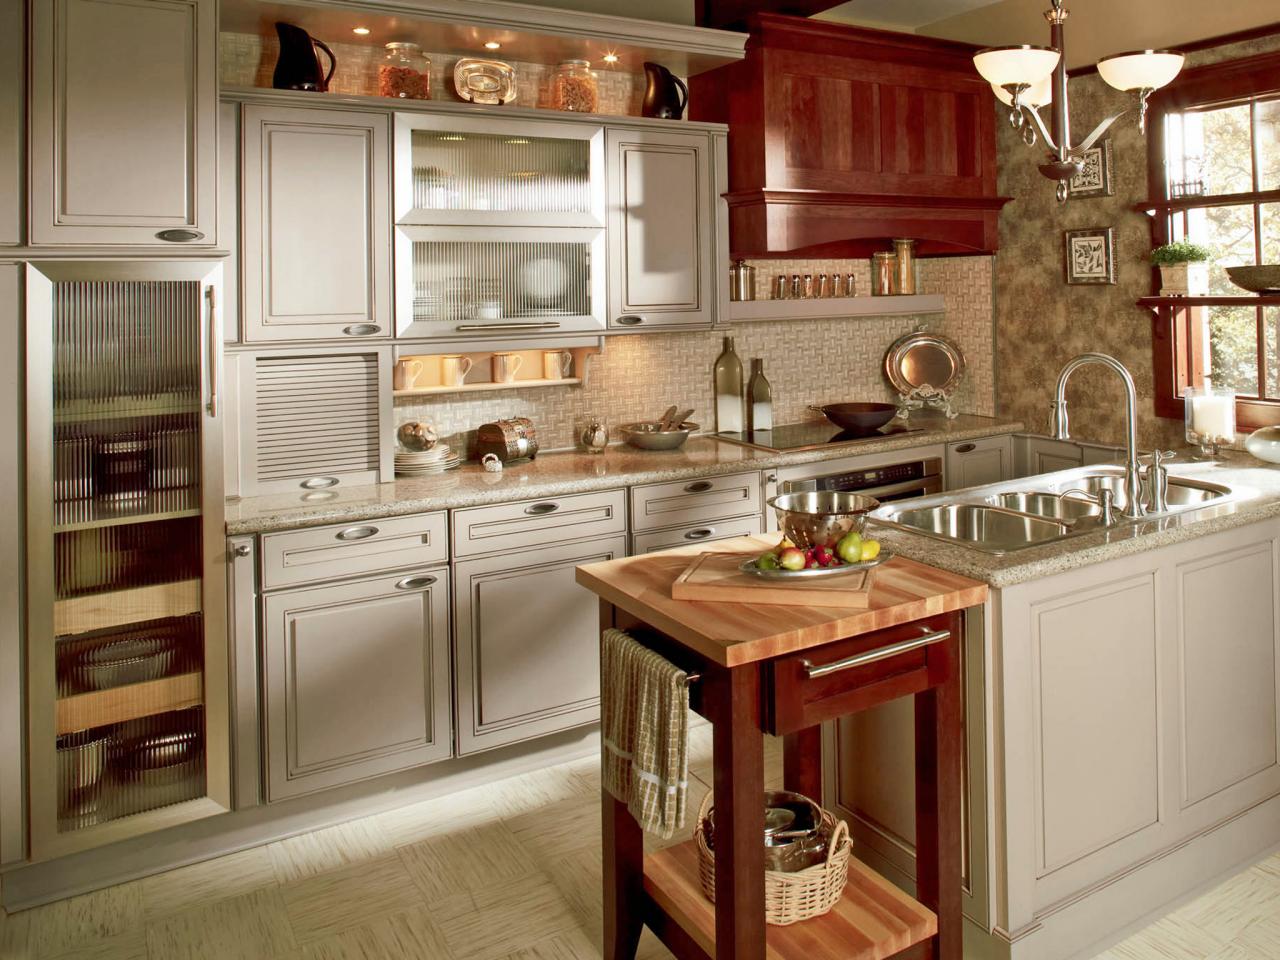 Kitchen Cabinet S Pictures Ideas, How Much Is A Full Set Of Kitchen Cabinets